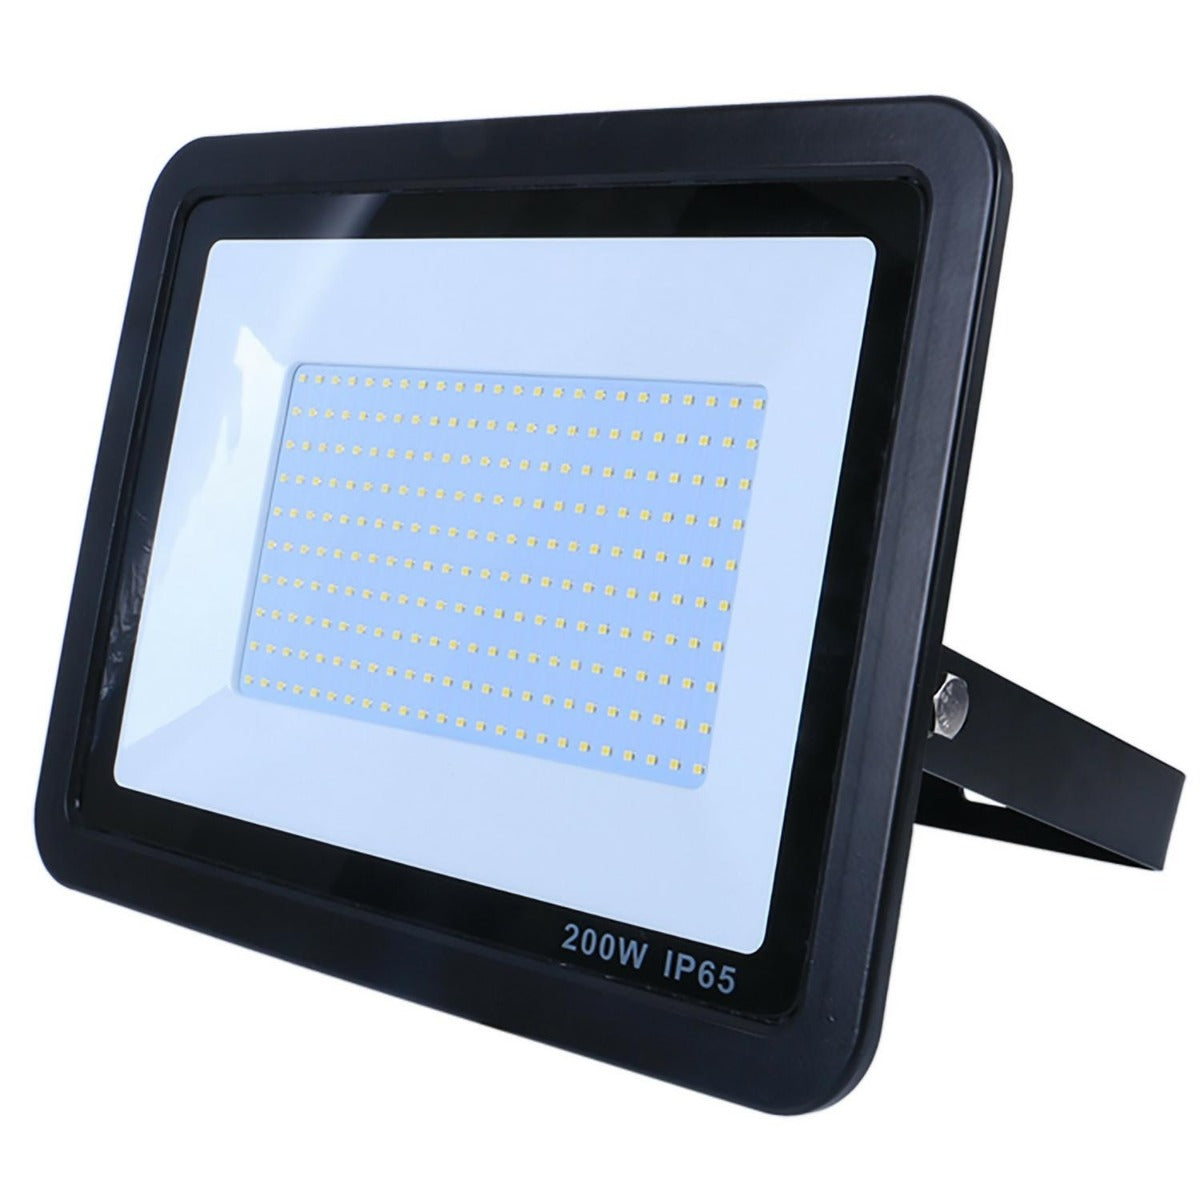 View 200w LED Flood Light With Photocell information